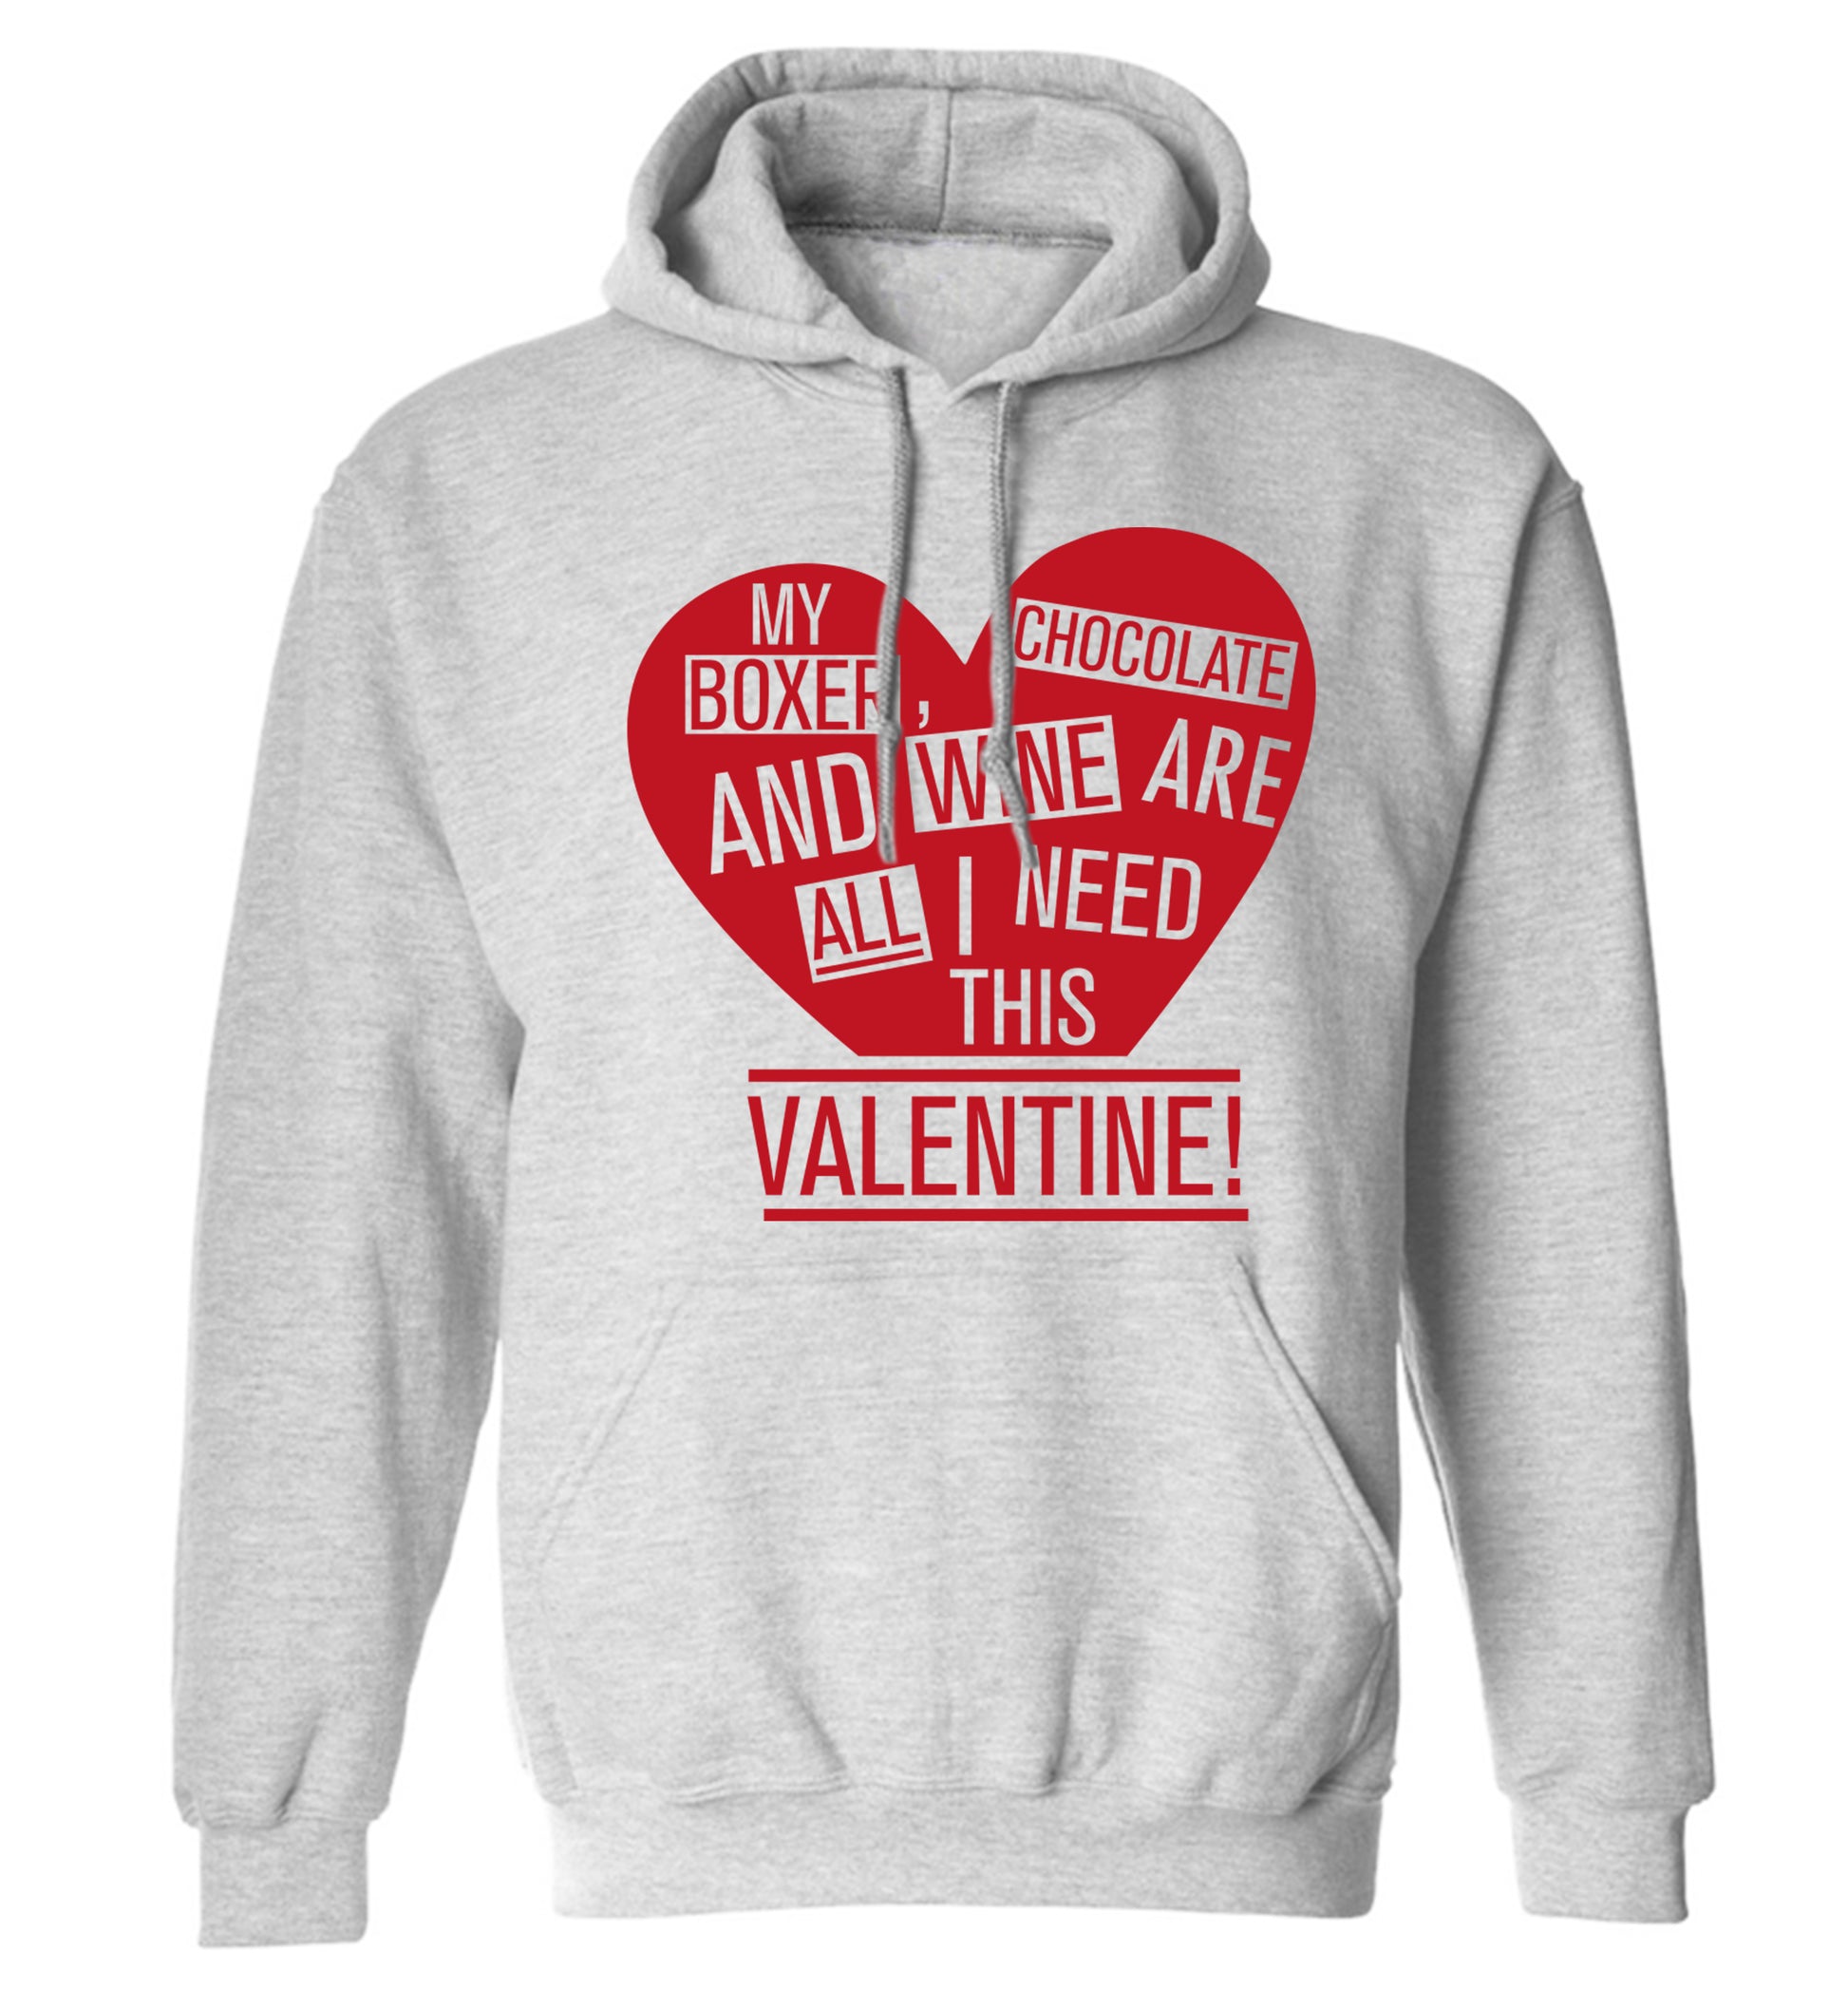 My Boxer, chocolate and wine are all I need this valentine! adults unisex grey hoodie 2XL